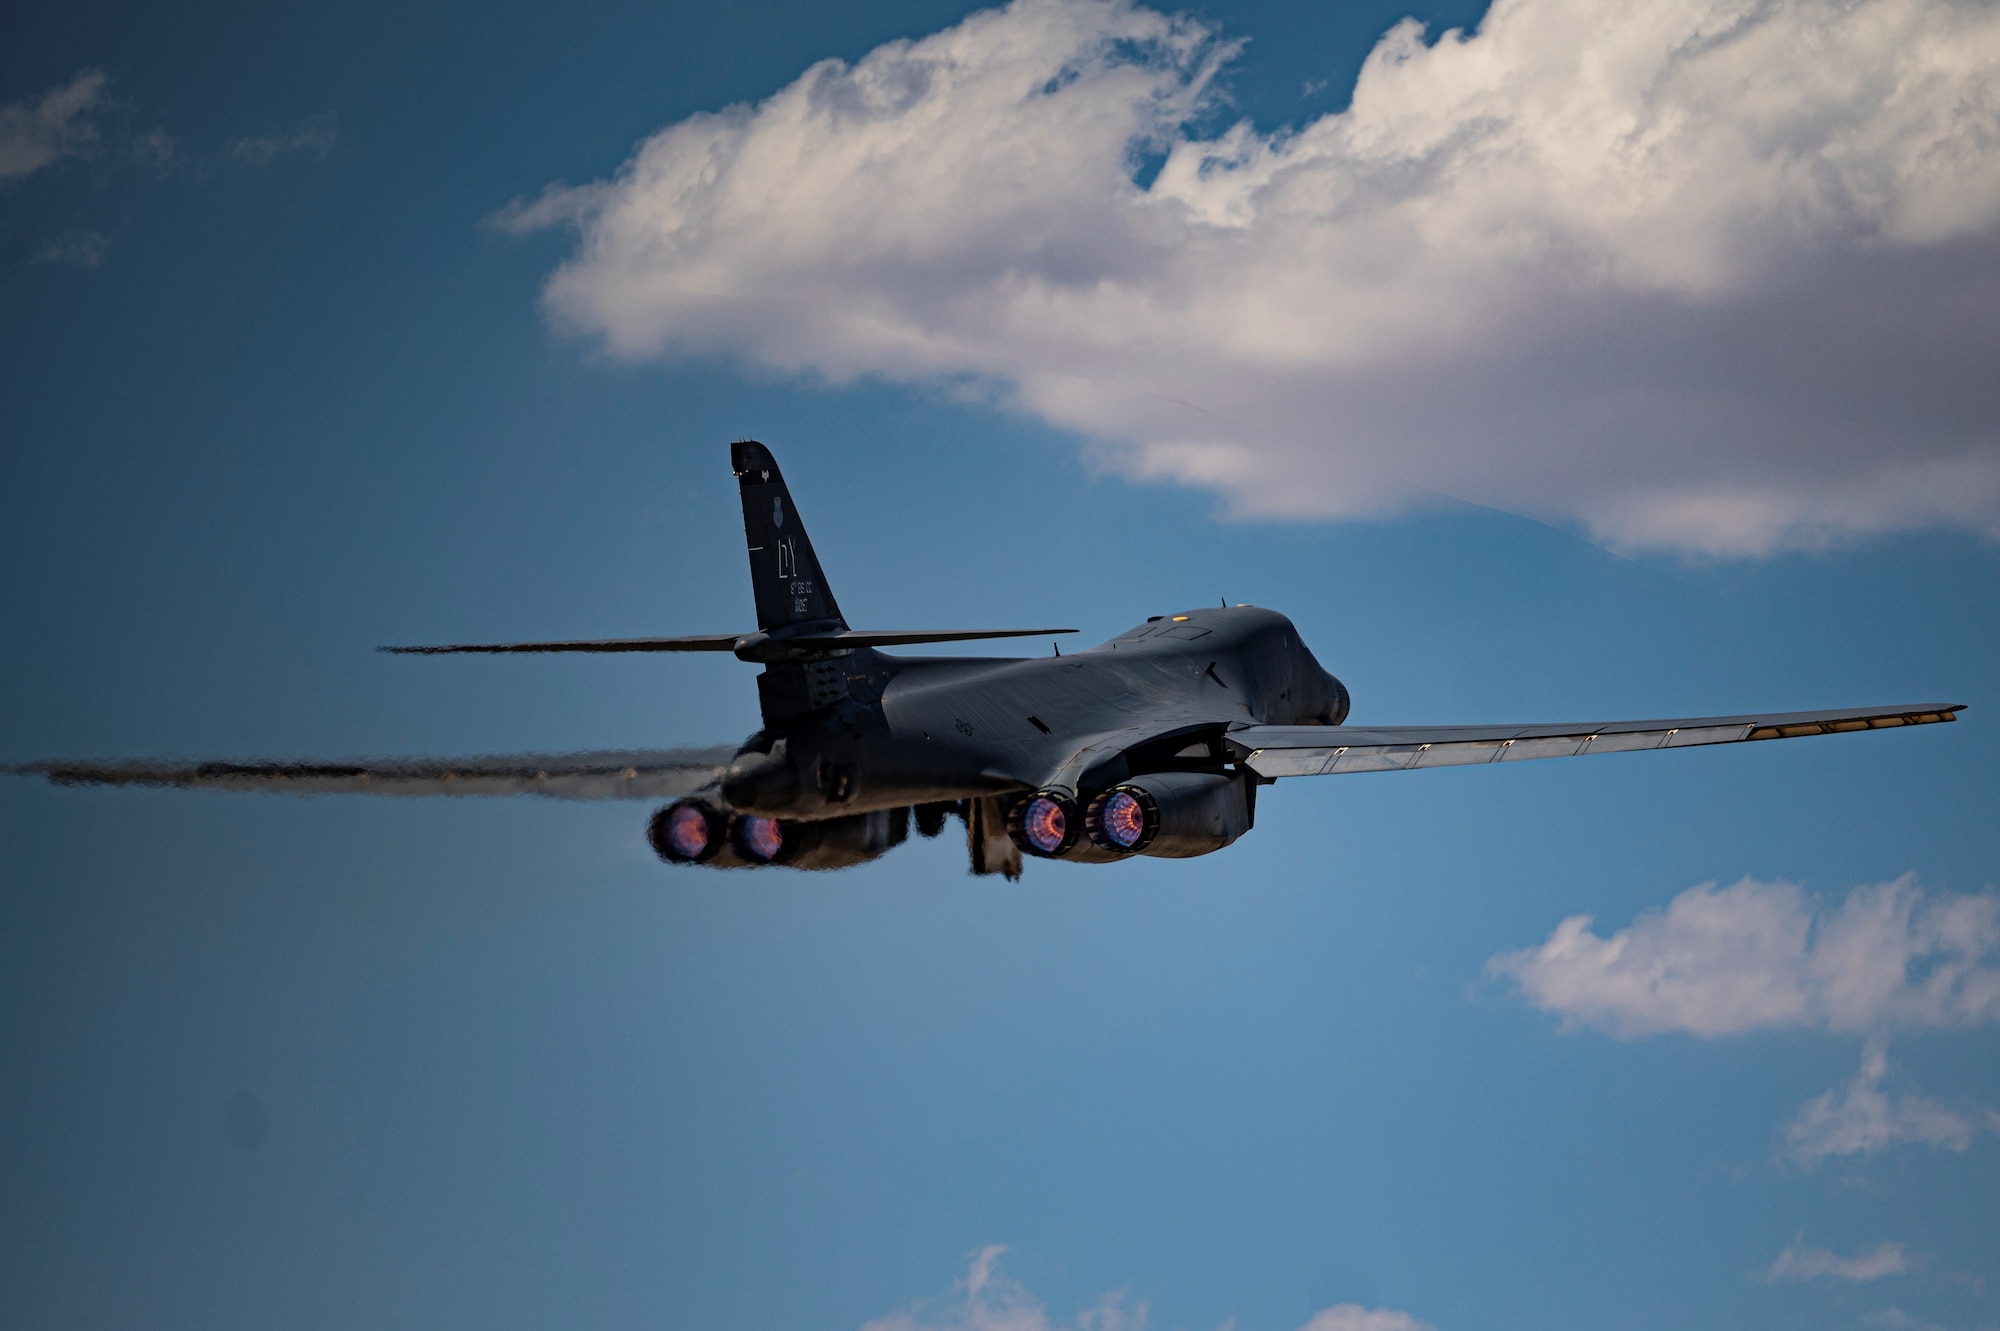 A B-1B Lancer departs from Dyess Air Force Base, Texas, June 29, 2022, in support of United States Africa Command's Exercise African Lion. The B-1 carries the largest payload of both guided and unguided conventional weapons in the United States inventory. (U.S. Air Force photo by Senior Airman Colin Hollowell)